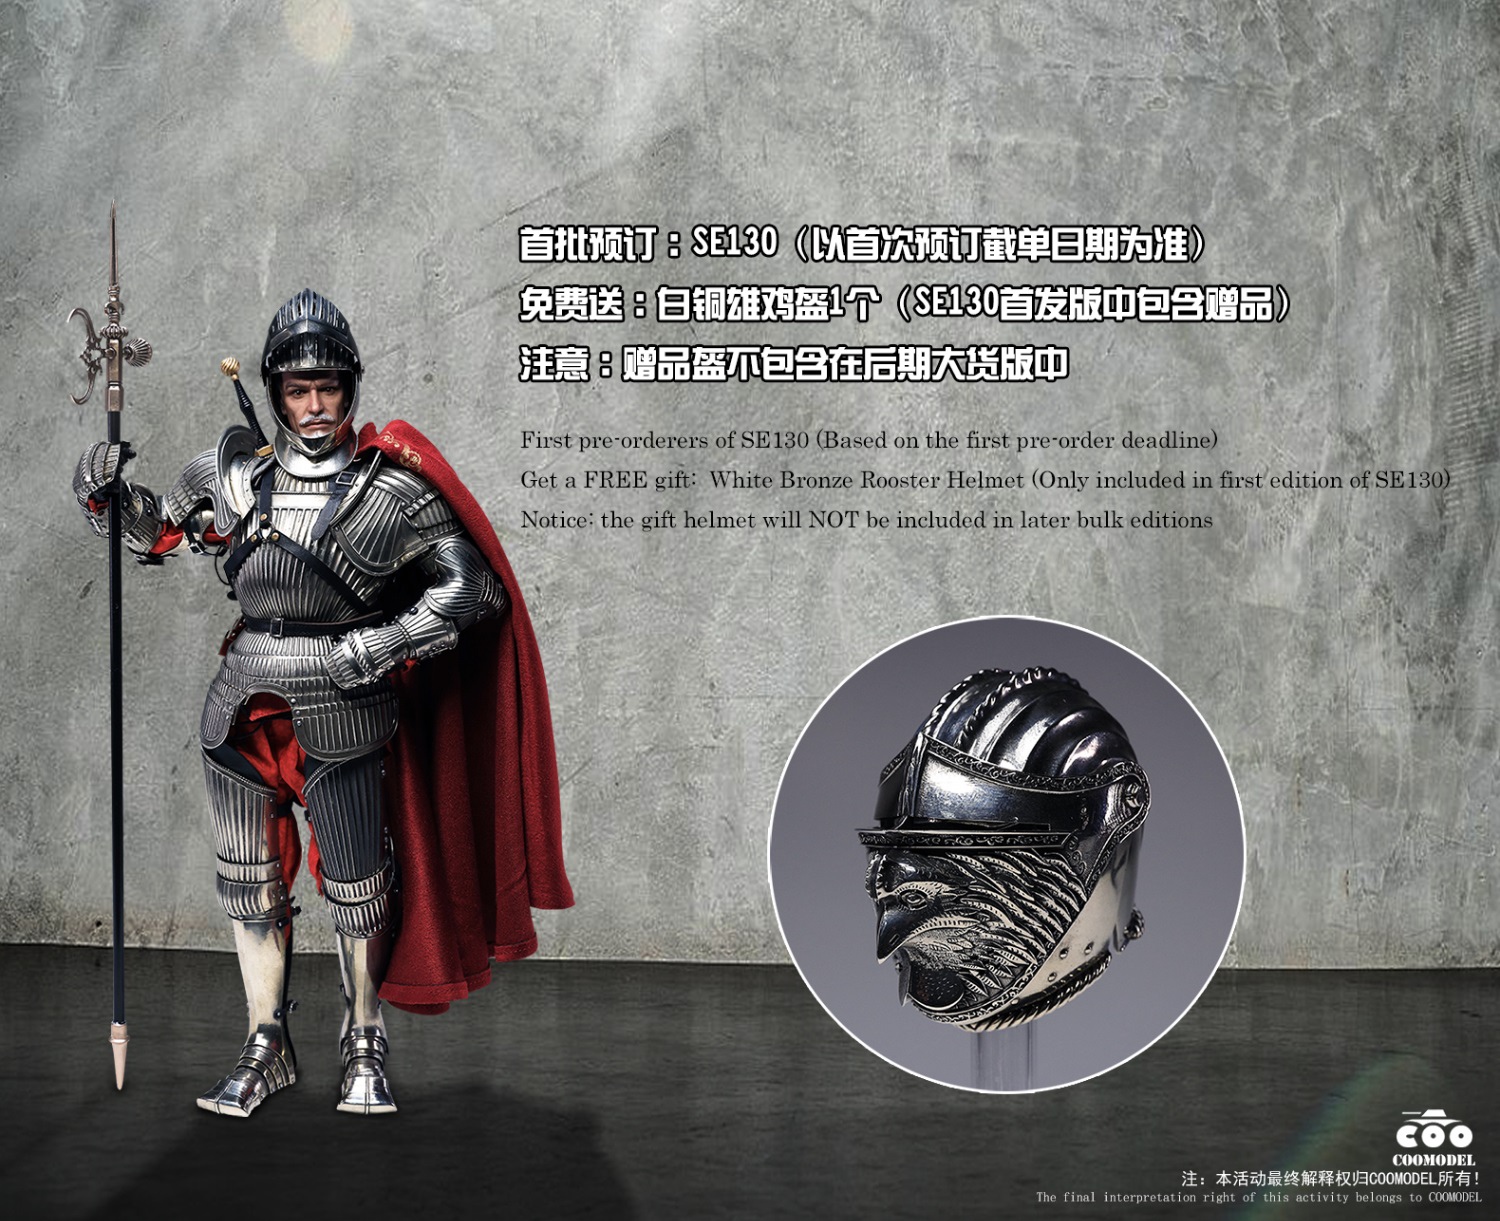 Knight - NEW PRODUCT: COOMODEL - Empire Series - Holy Empire Knight (White Bronze Commemorative Edition) SE130 16162